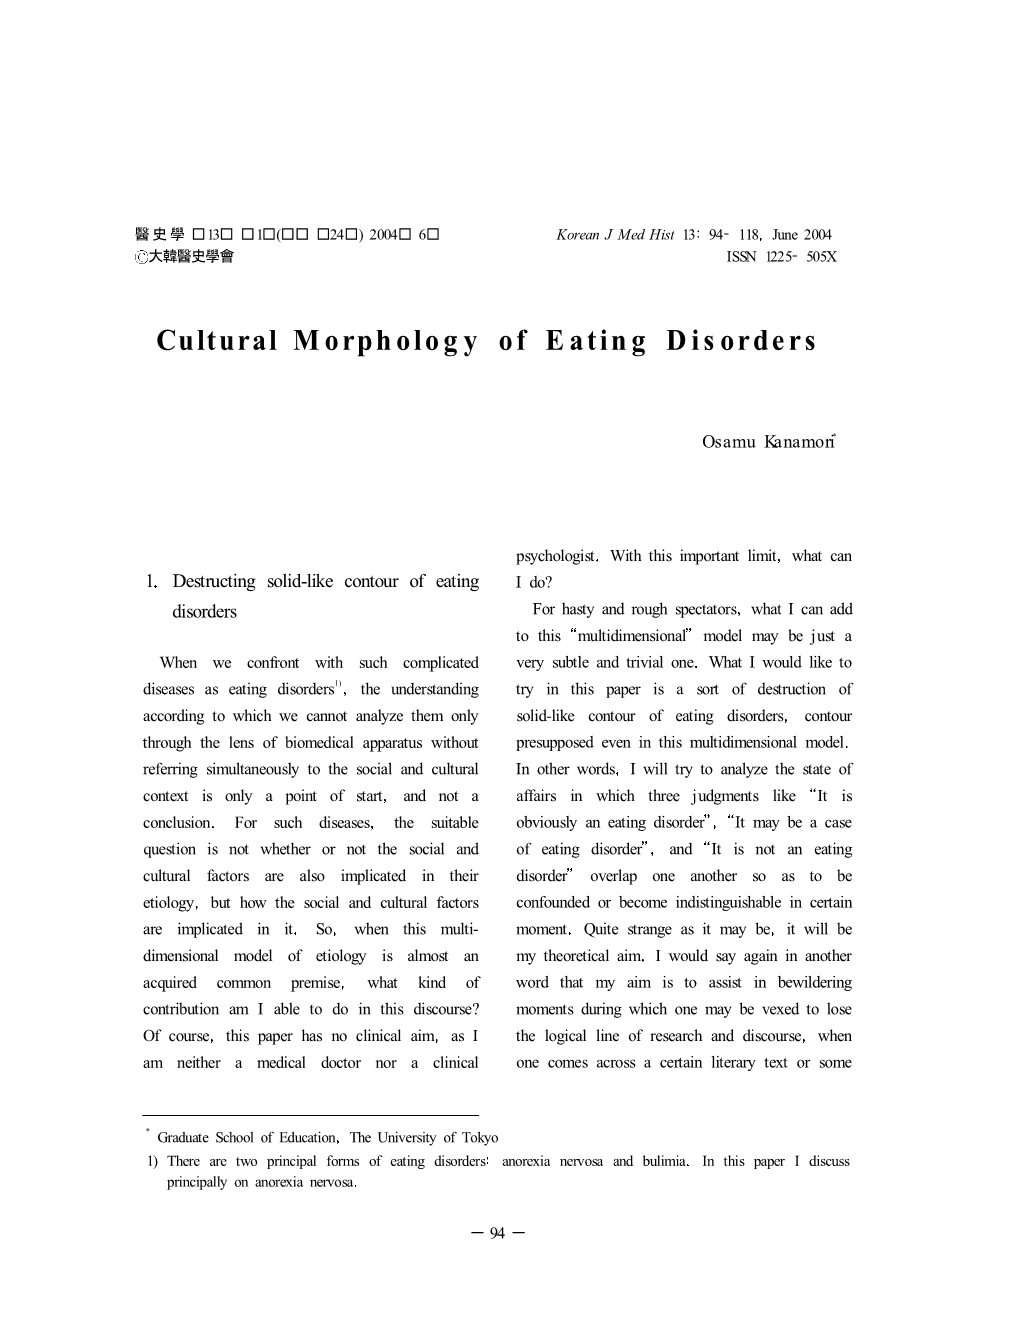 Cultural Morphology of Eating Disorders